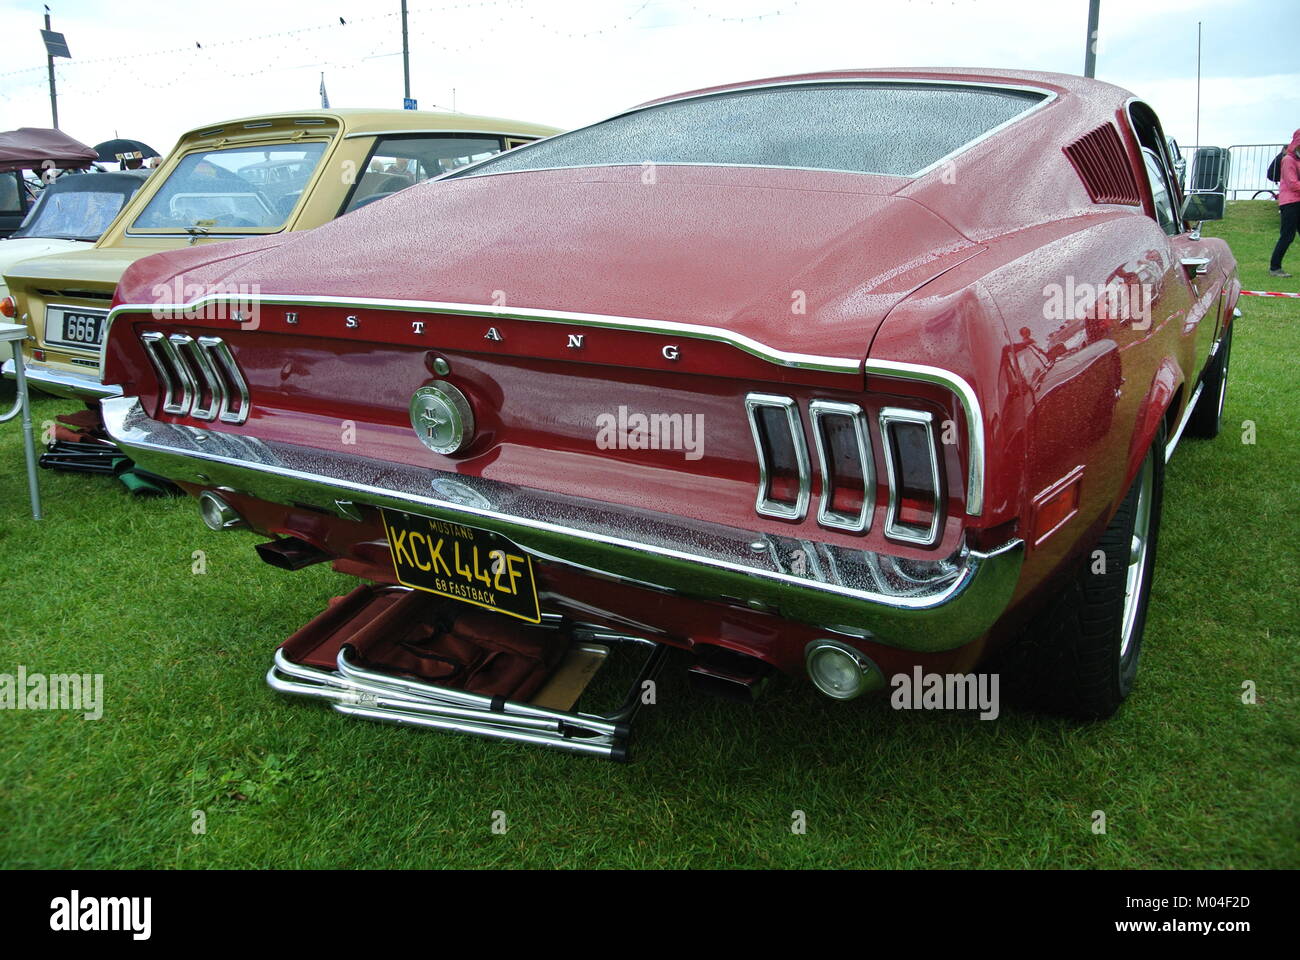 A 1971 Ford Mustang classic American muscle car parked up on display at the English Riviera classic car show, Paignton, Devon, England, UK. Stock Photo